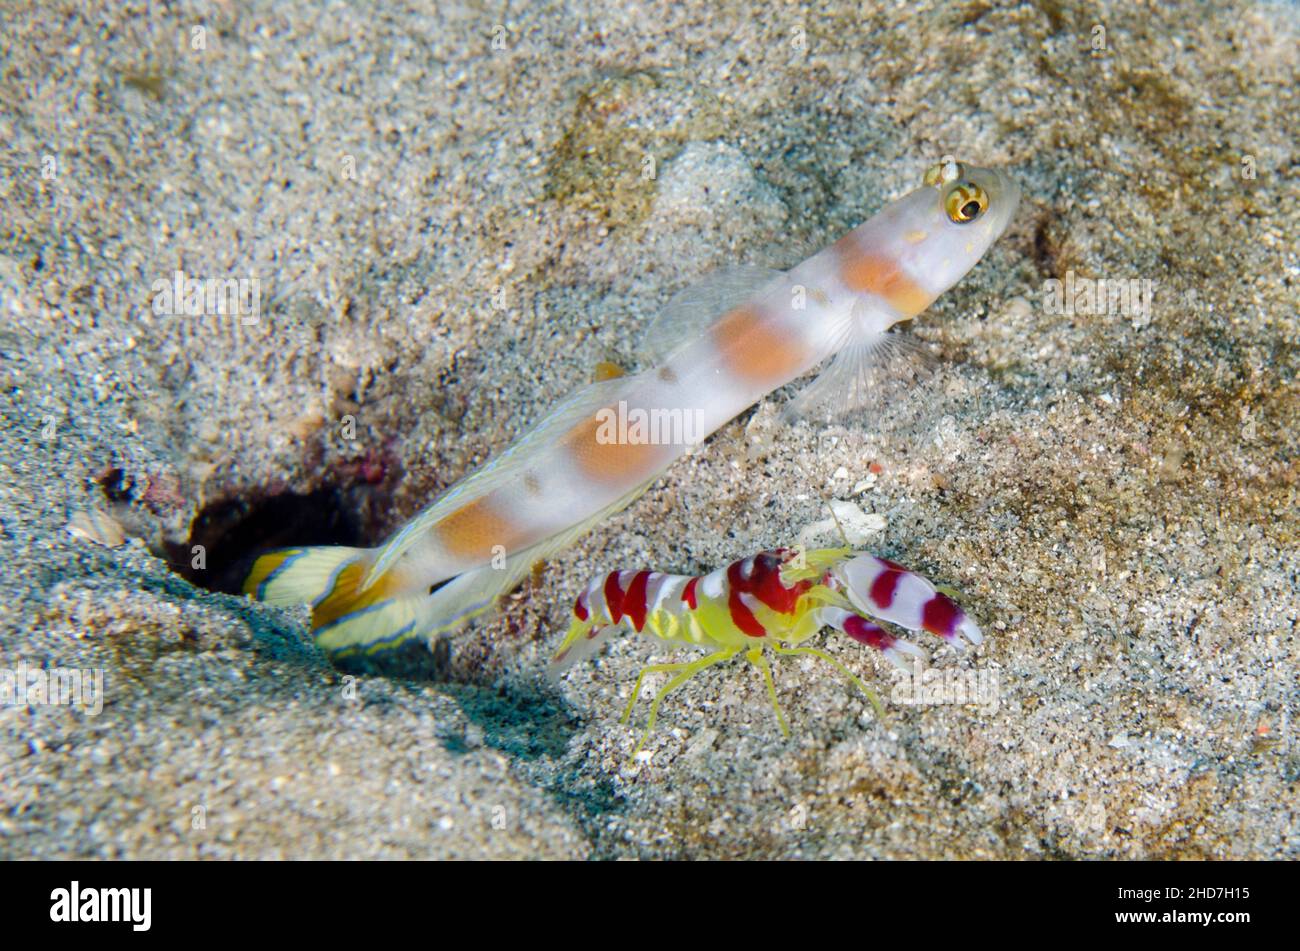 Flagtail Shrimpgoby (Amblyeleotris yanoi) with Randall's Snapping Shrimp (Alpheus randalli), where the shrimp who are natural burrowers digs and Stock Photo